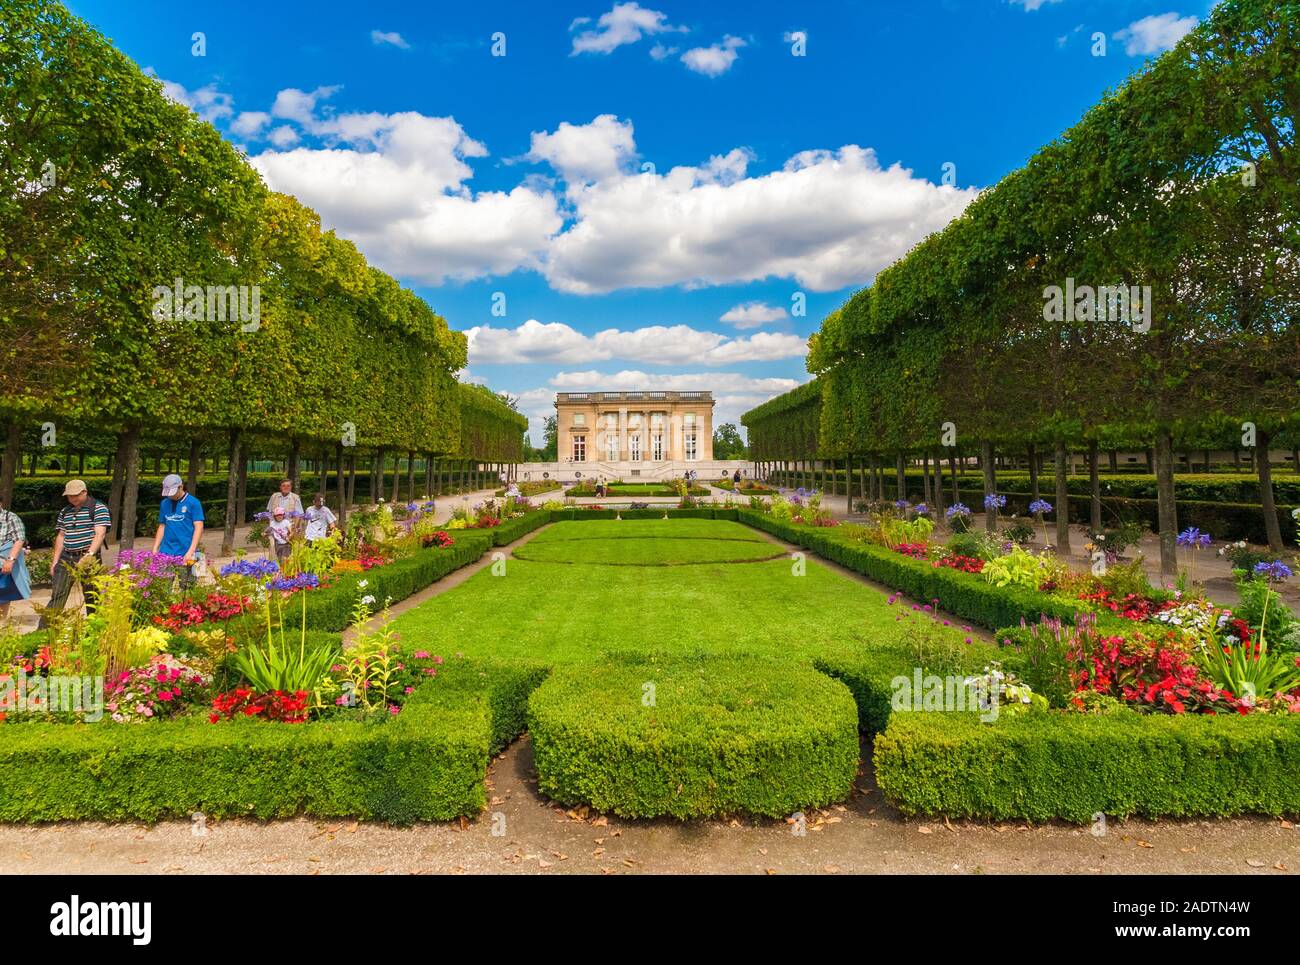 Great panoramic view of the Petit Trianon Palace in Versailles with the beautiful geometric formed garden, flanked by a row of trees on a nice summer... Stock Photo